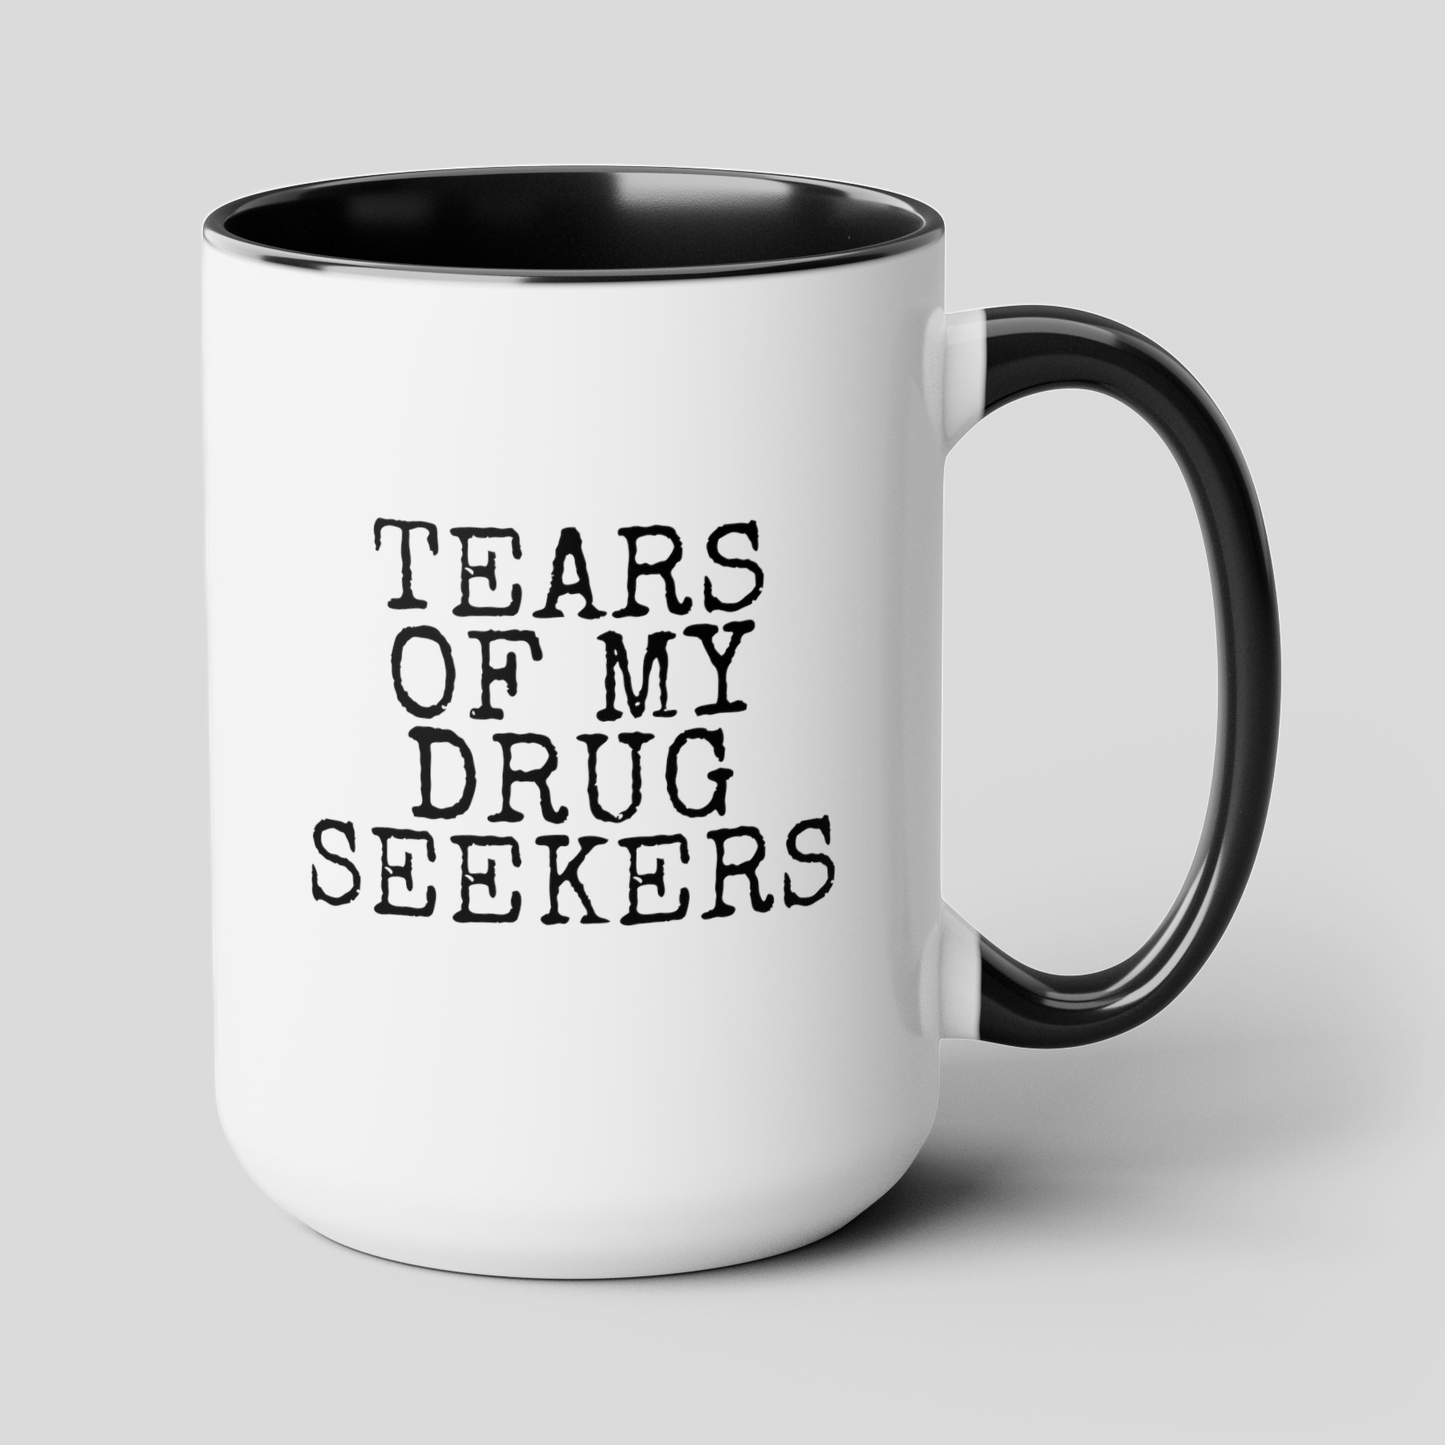 Tears Of My Drug Seekers 15oz white with black accent funny large coffee mug gift for doctor physician assistant pharmacist pharmacy medicine women men waveywares wavey wares wavywares wavy wares cover